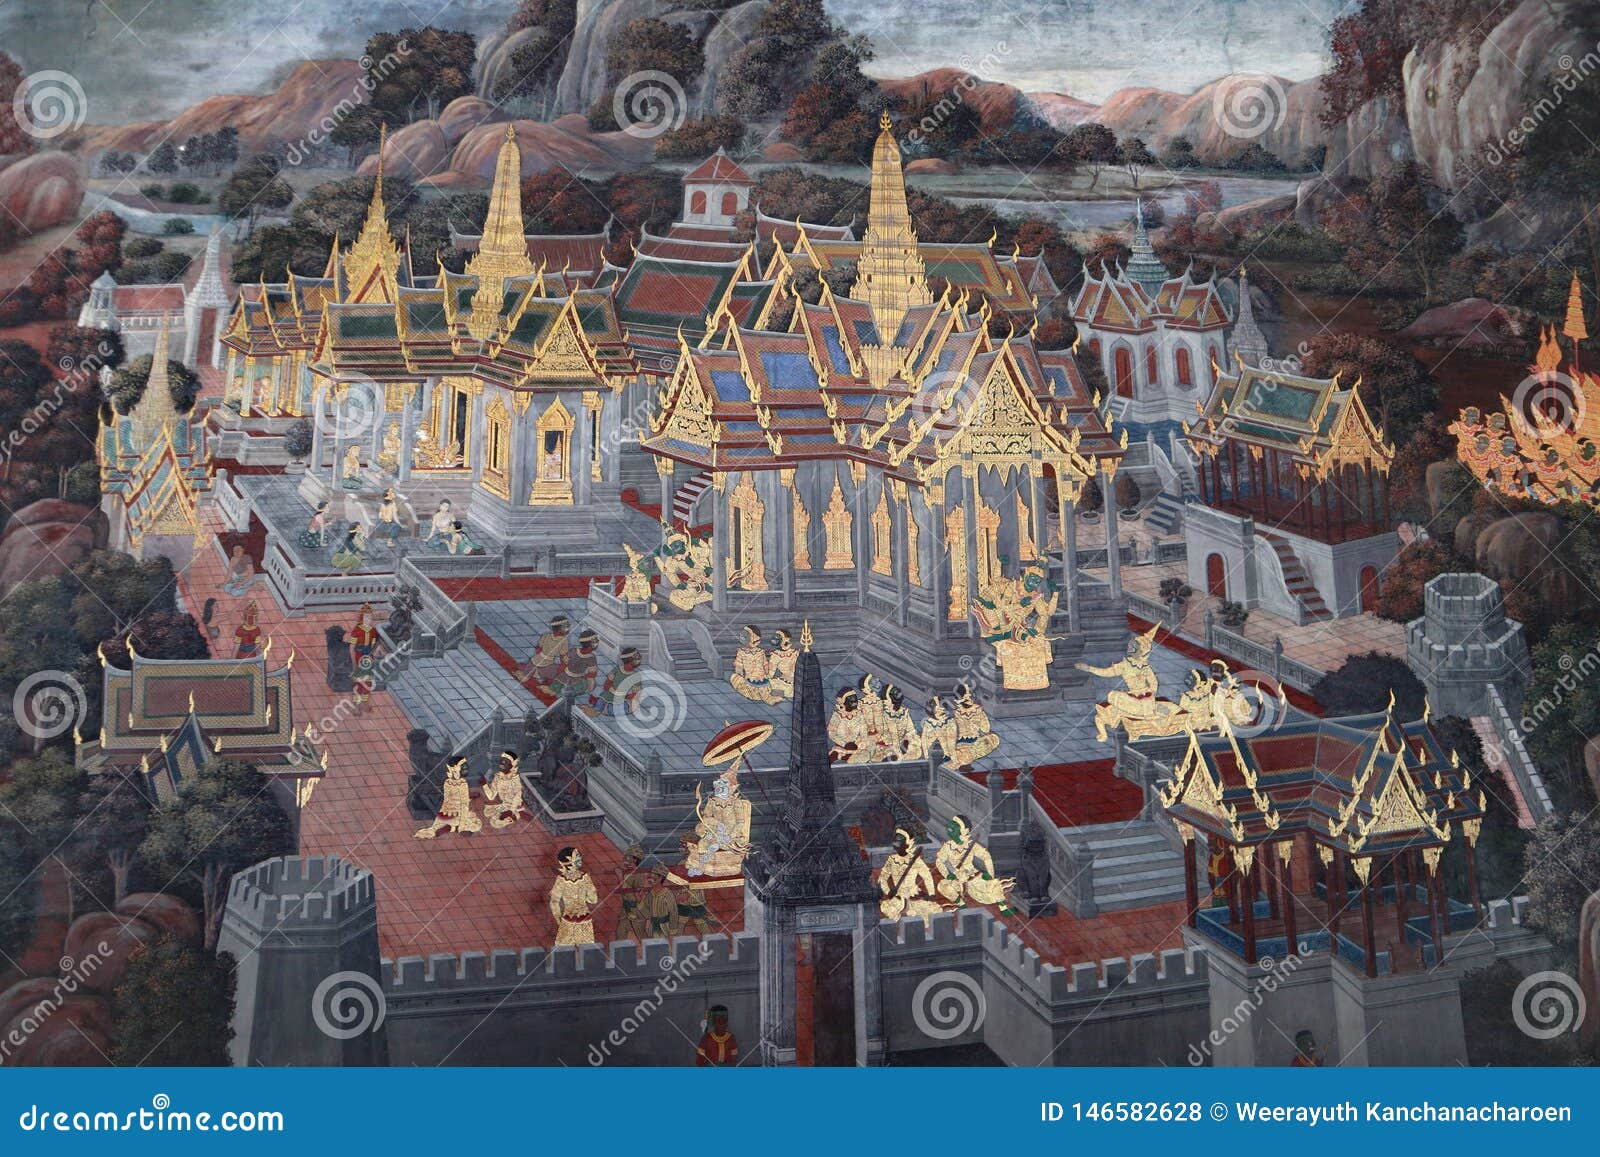 the ramakien ramayana mural paintings along the galleries of the temple of the emerald buddha, grand palace or wat phra kaew